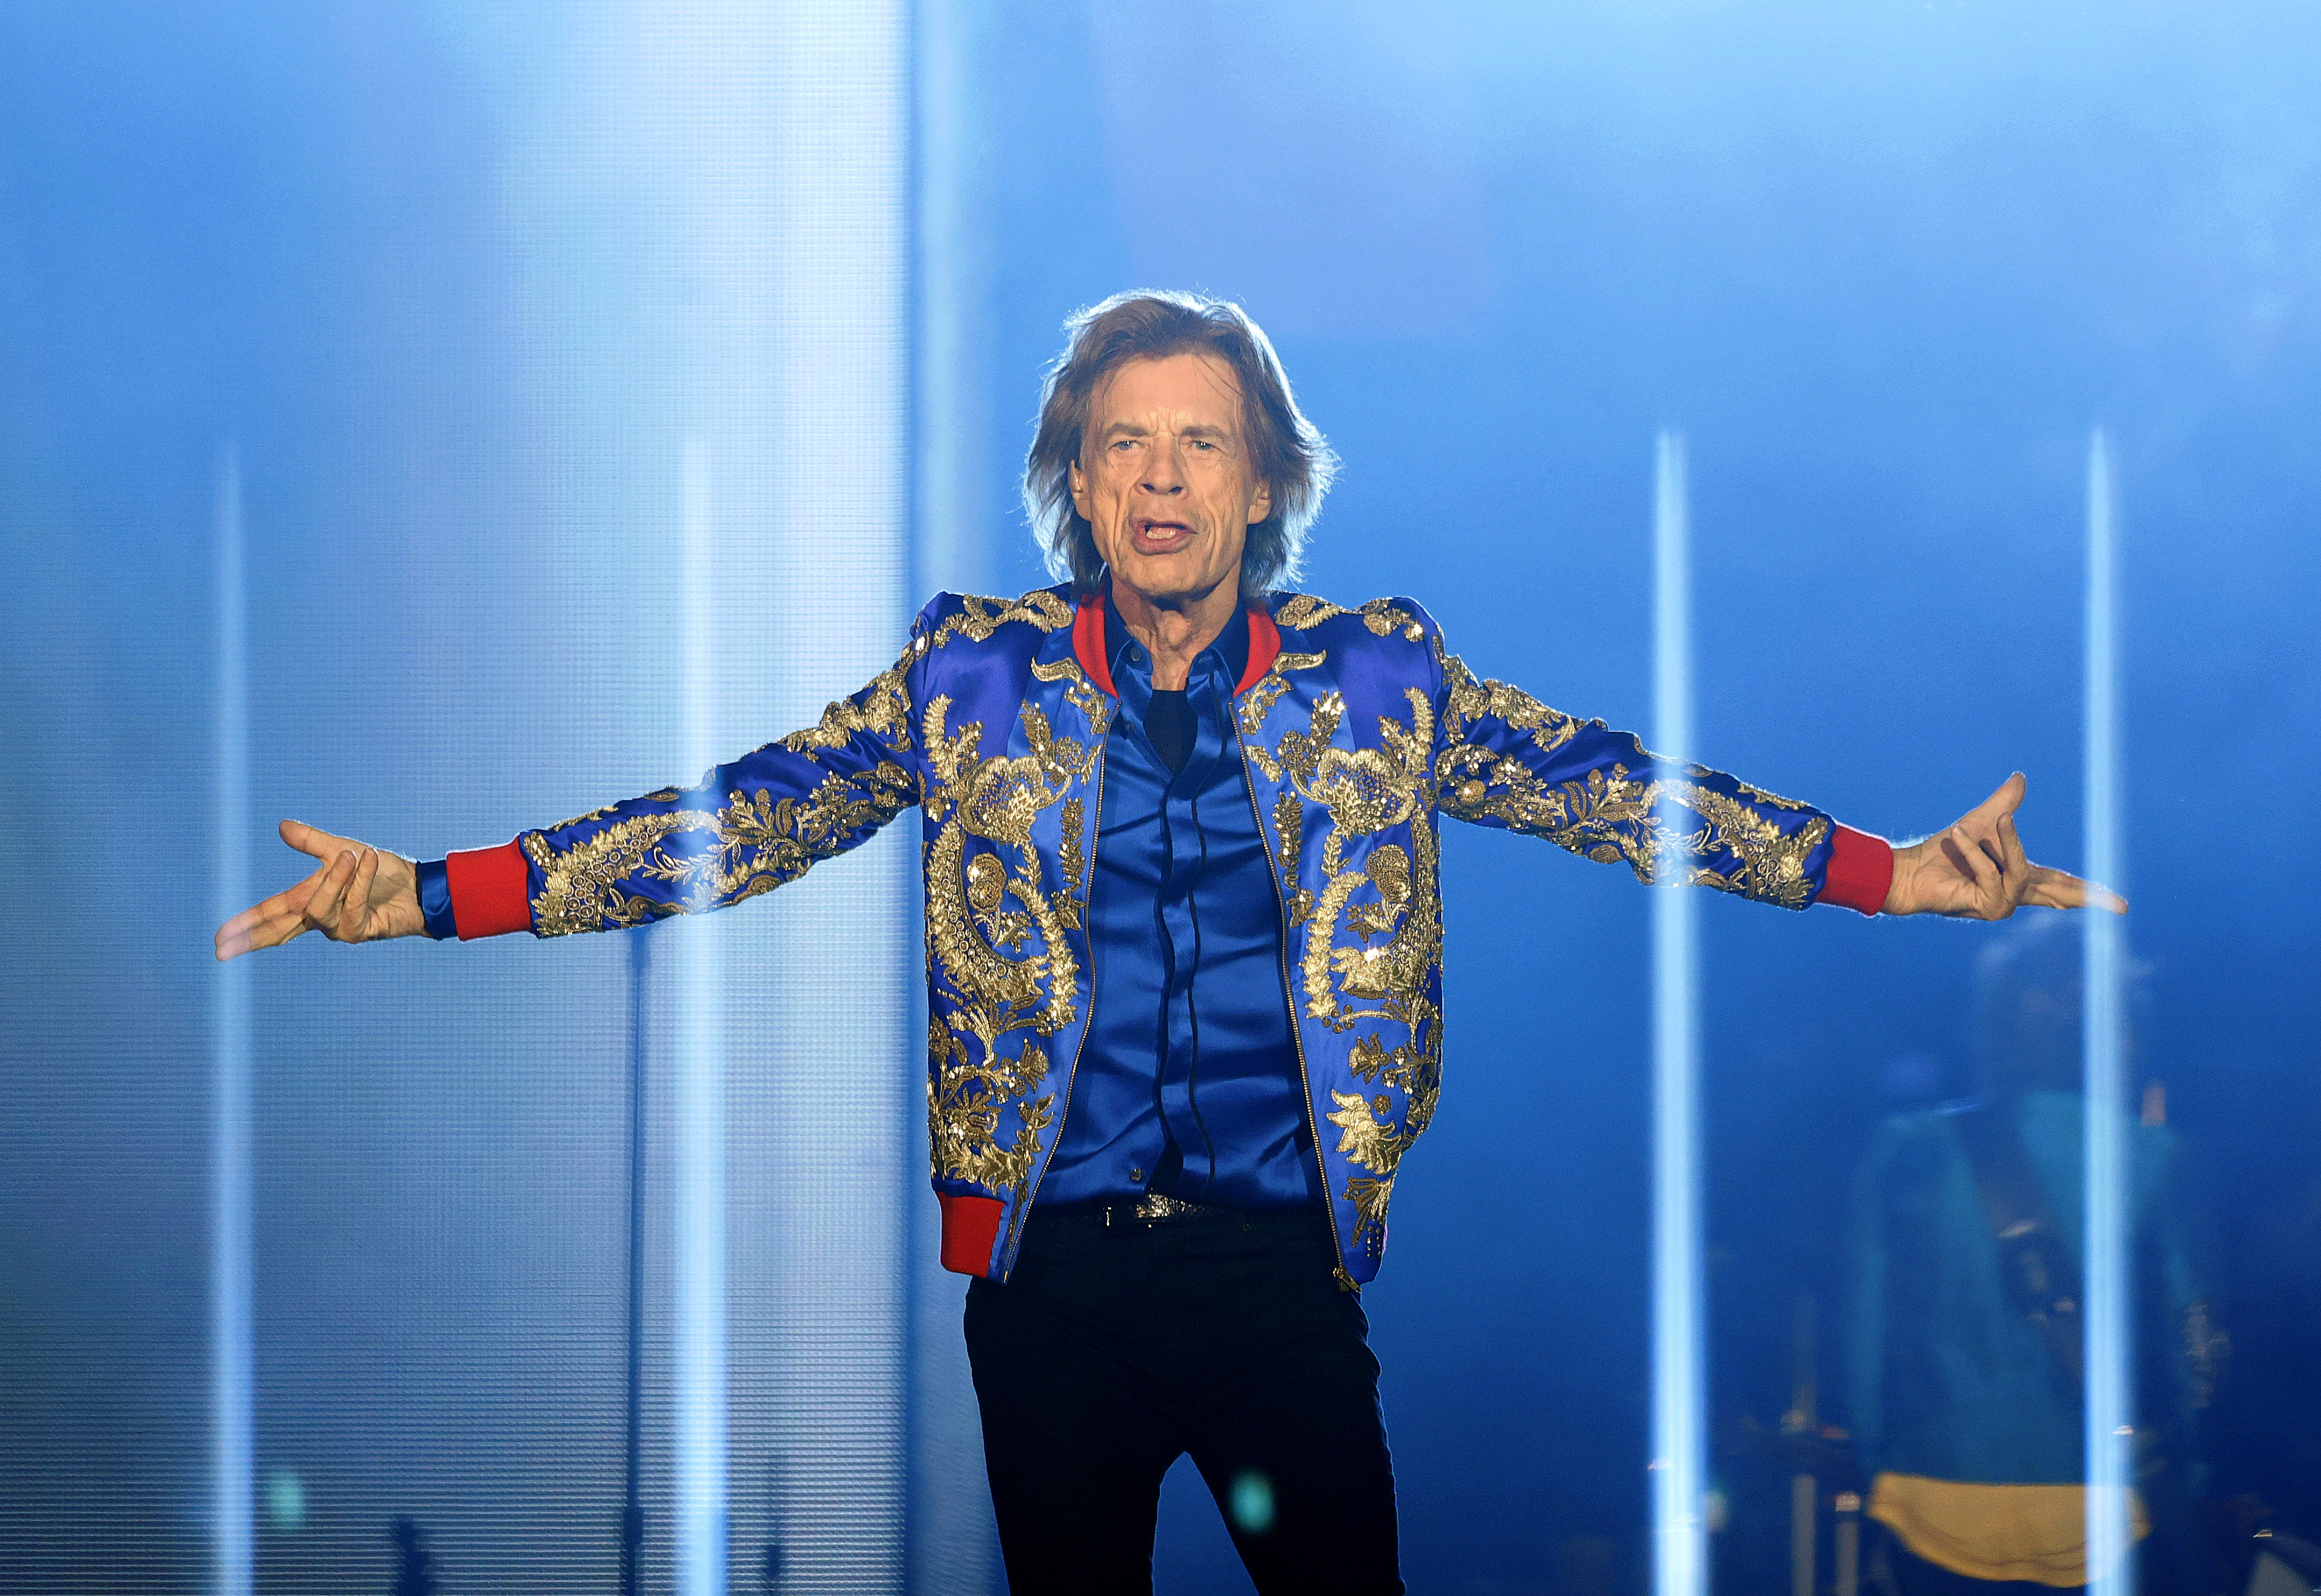 Mick Jagger of The Rolling Stones performs